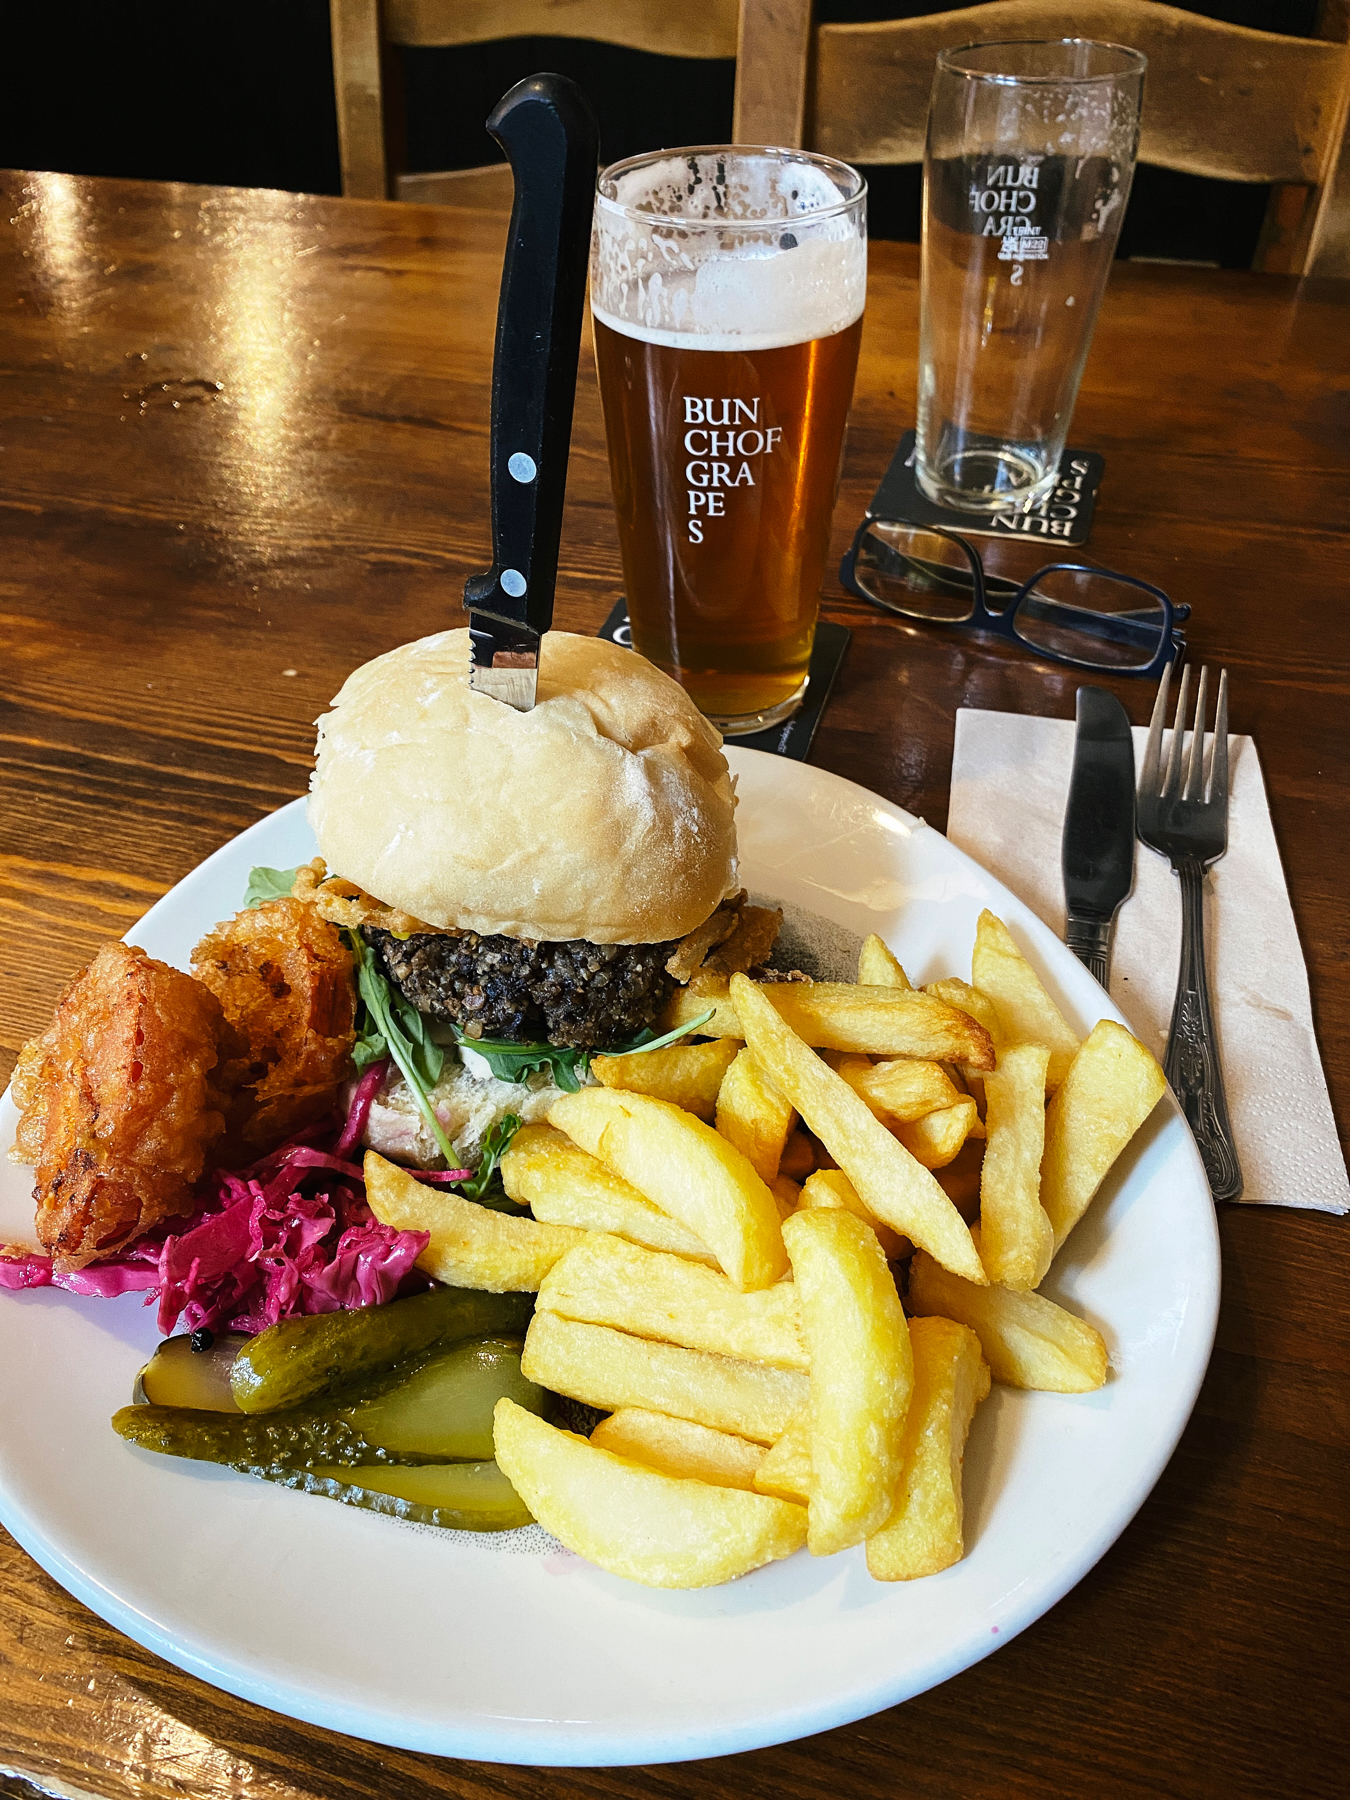 Plate containing vegan burger, chips and pickles